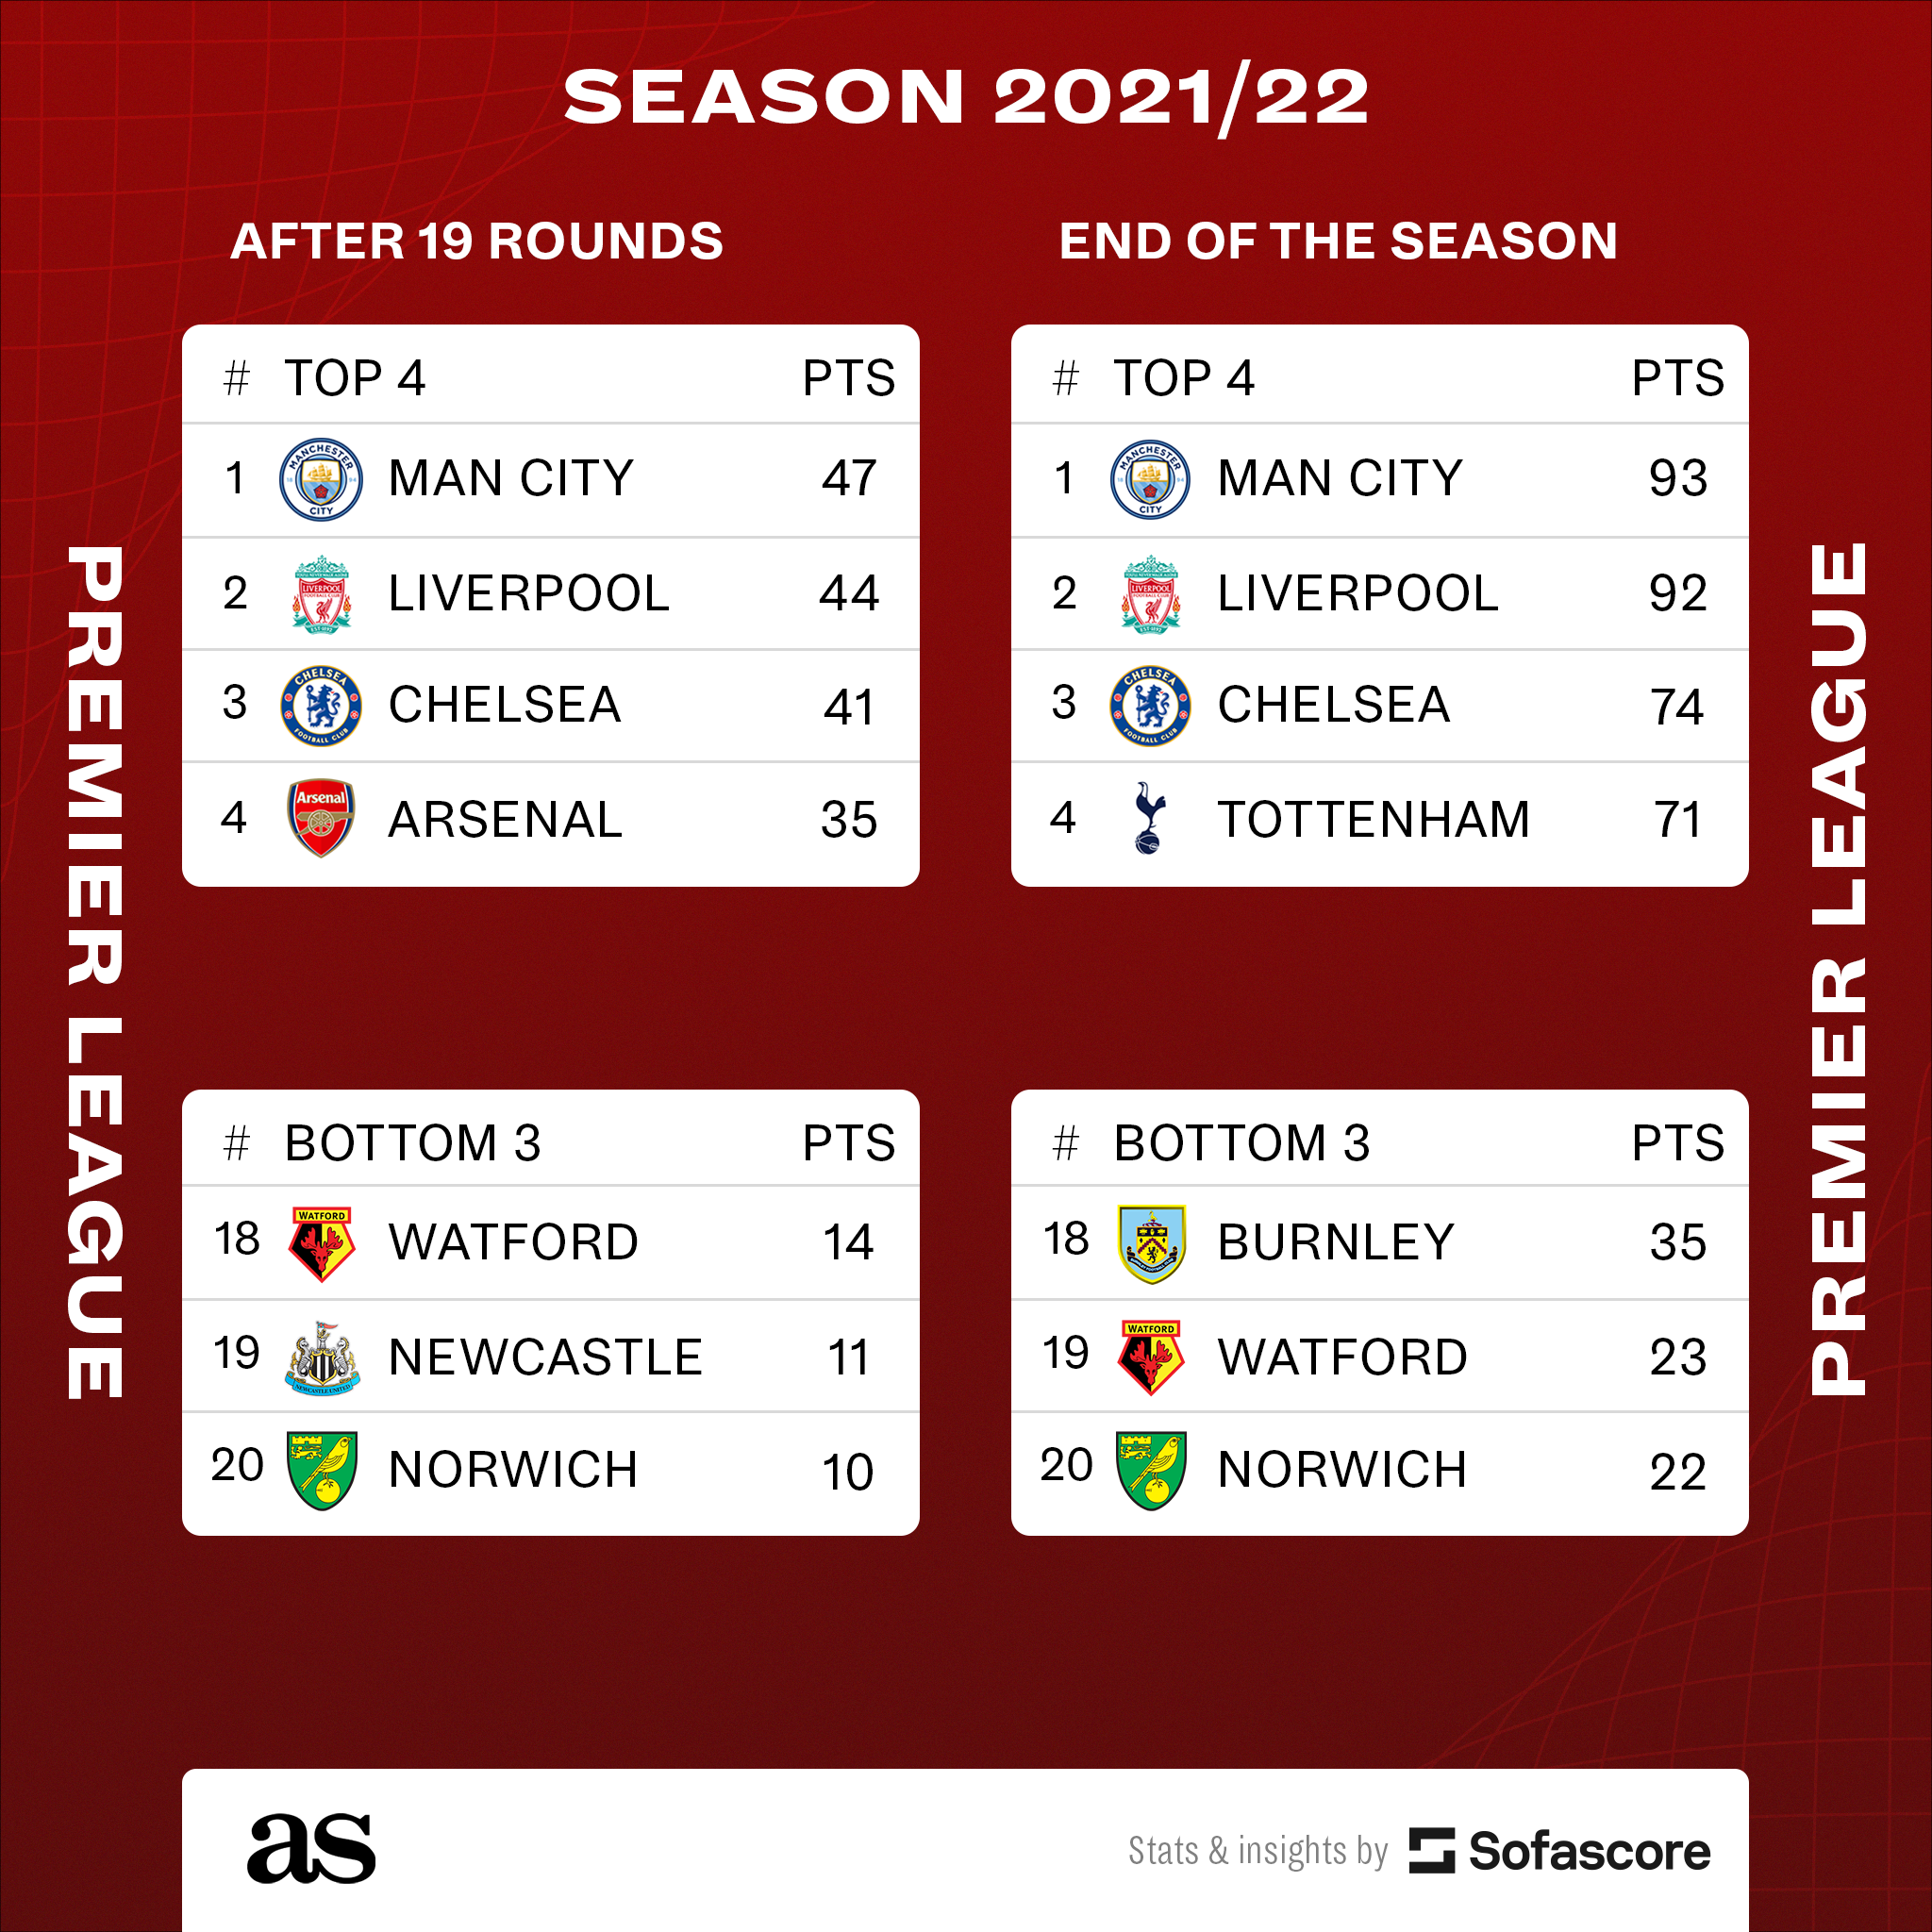 How much does the Premier League table normally change in the second half of the season?